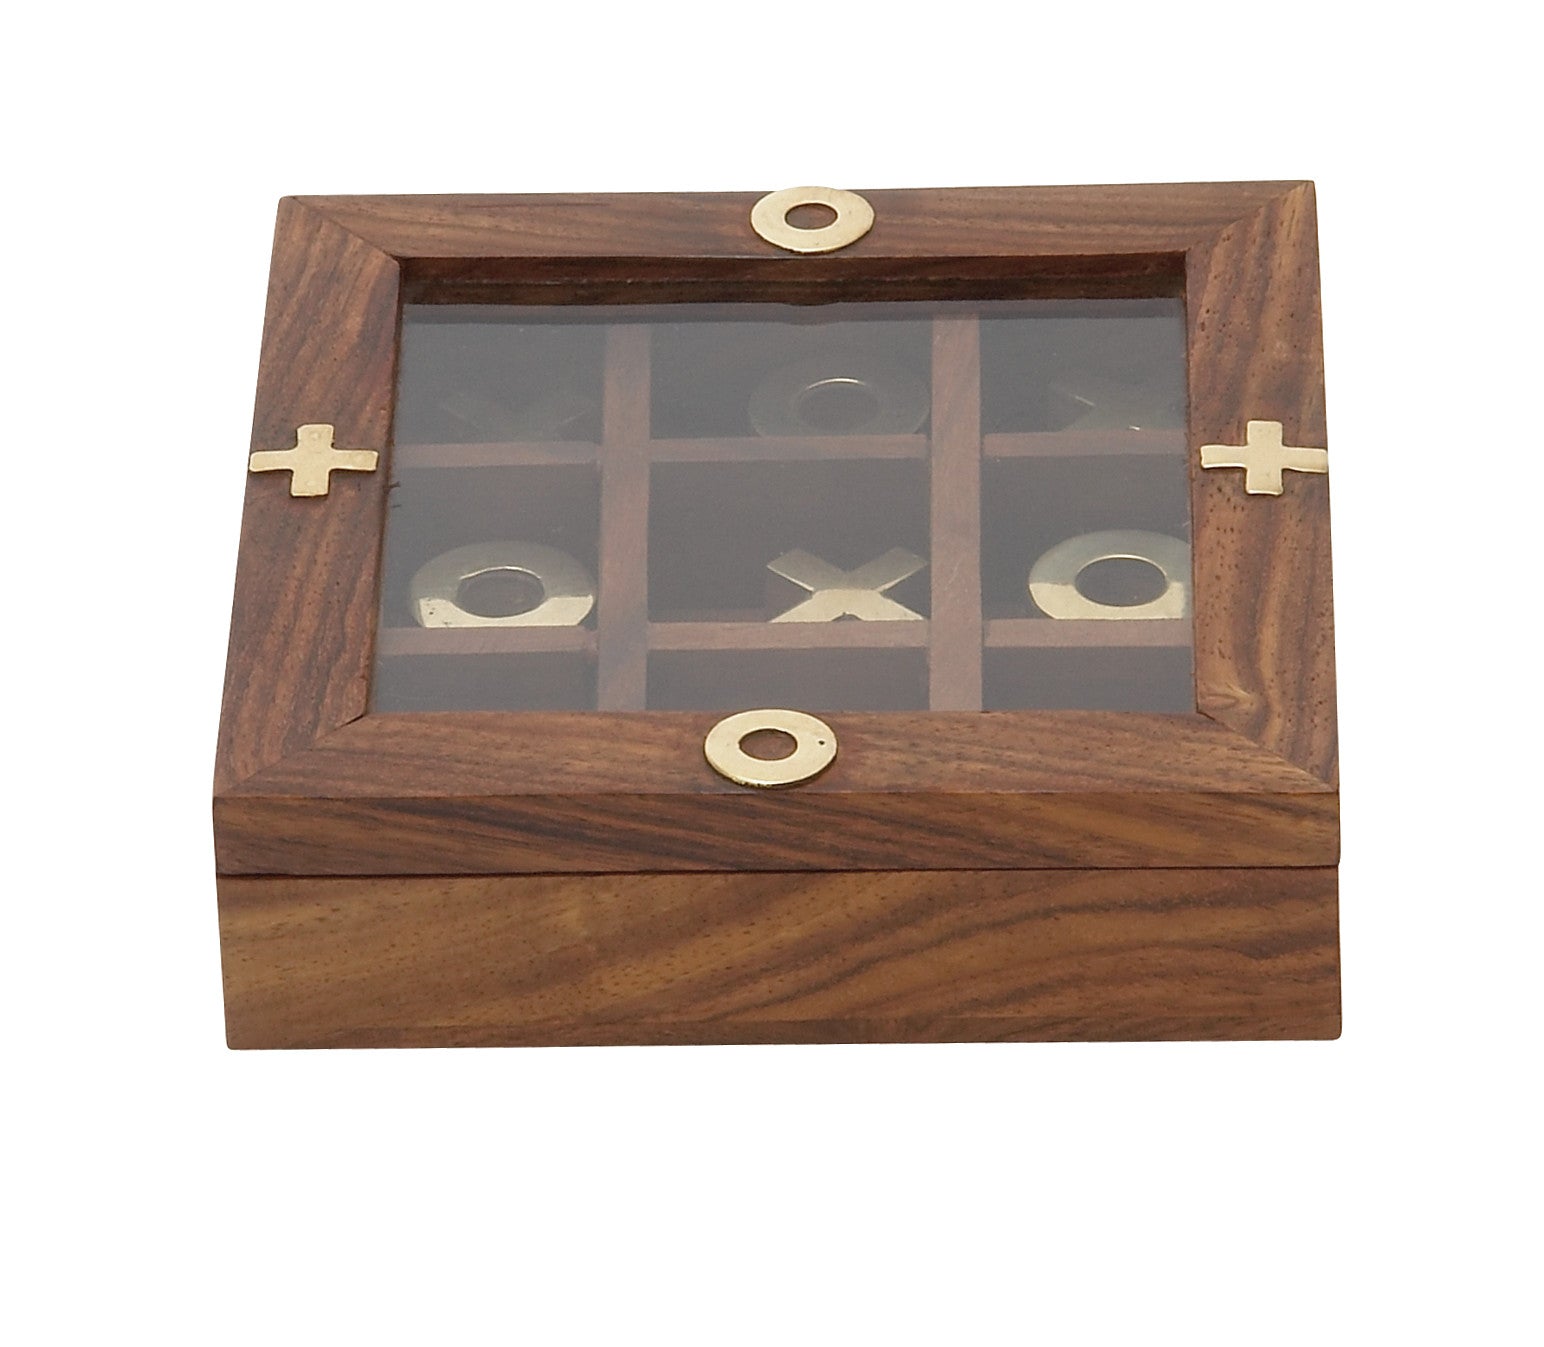 Traditional square tic tac toe case with a brown finish, glass window, and brass "x" and "o" symbols in a polished finish